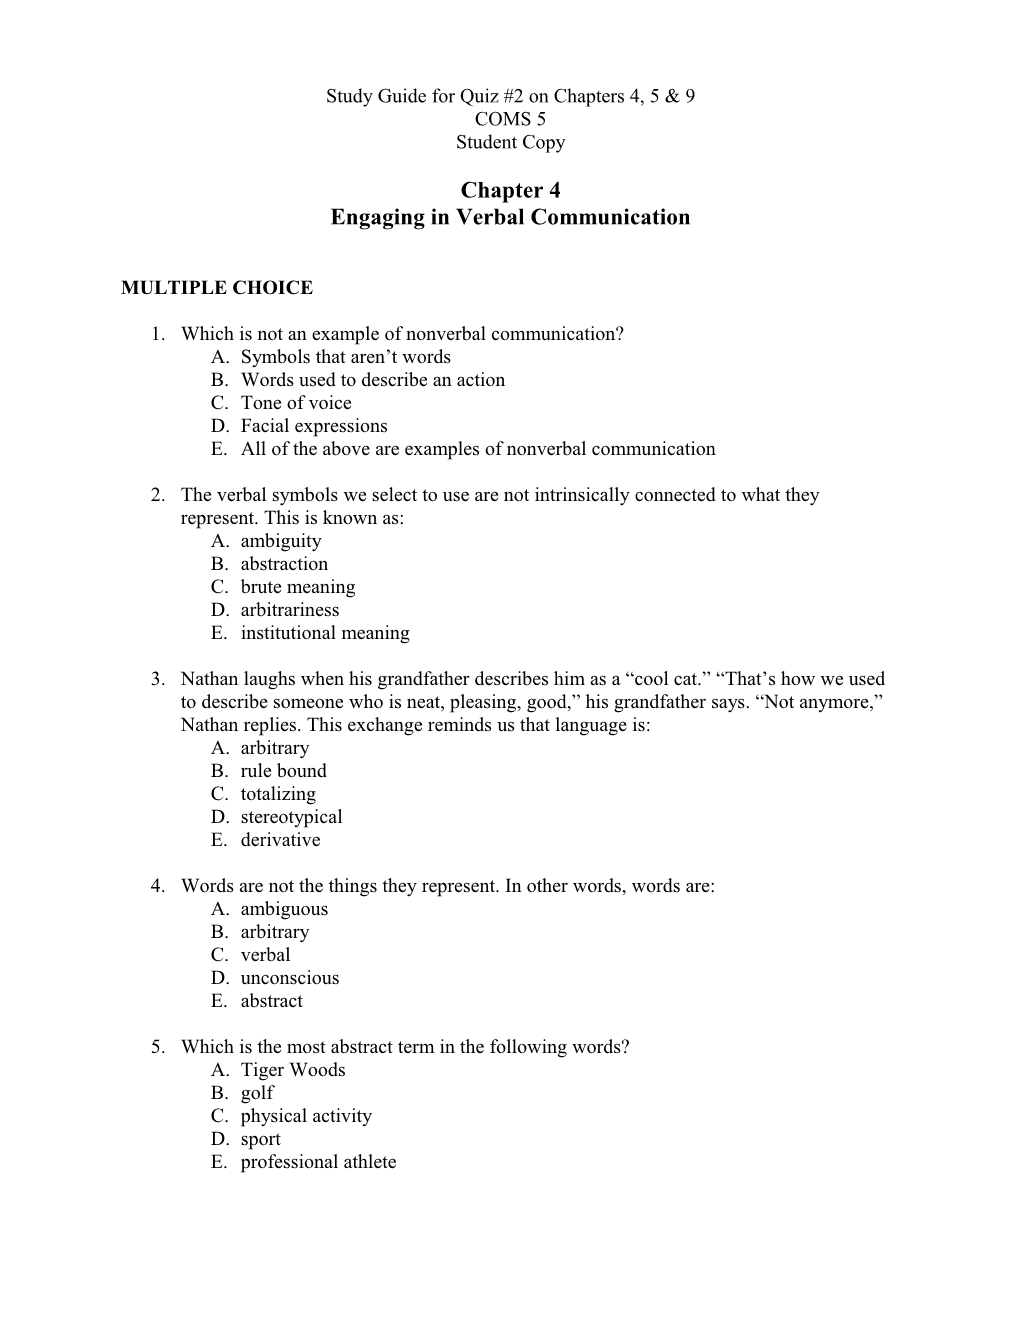 Study Guide For Quiz #2 On Chapters 4, 5 & 9